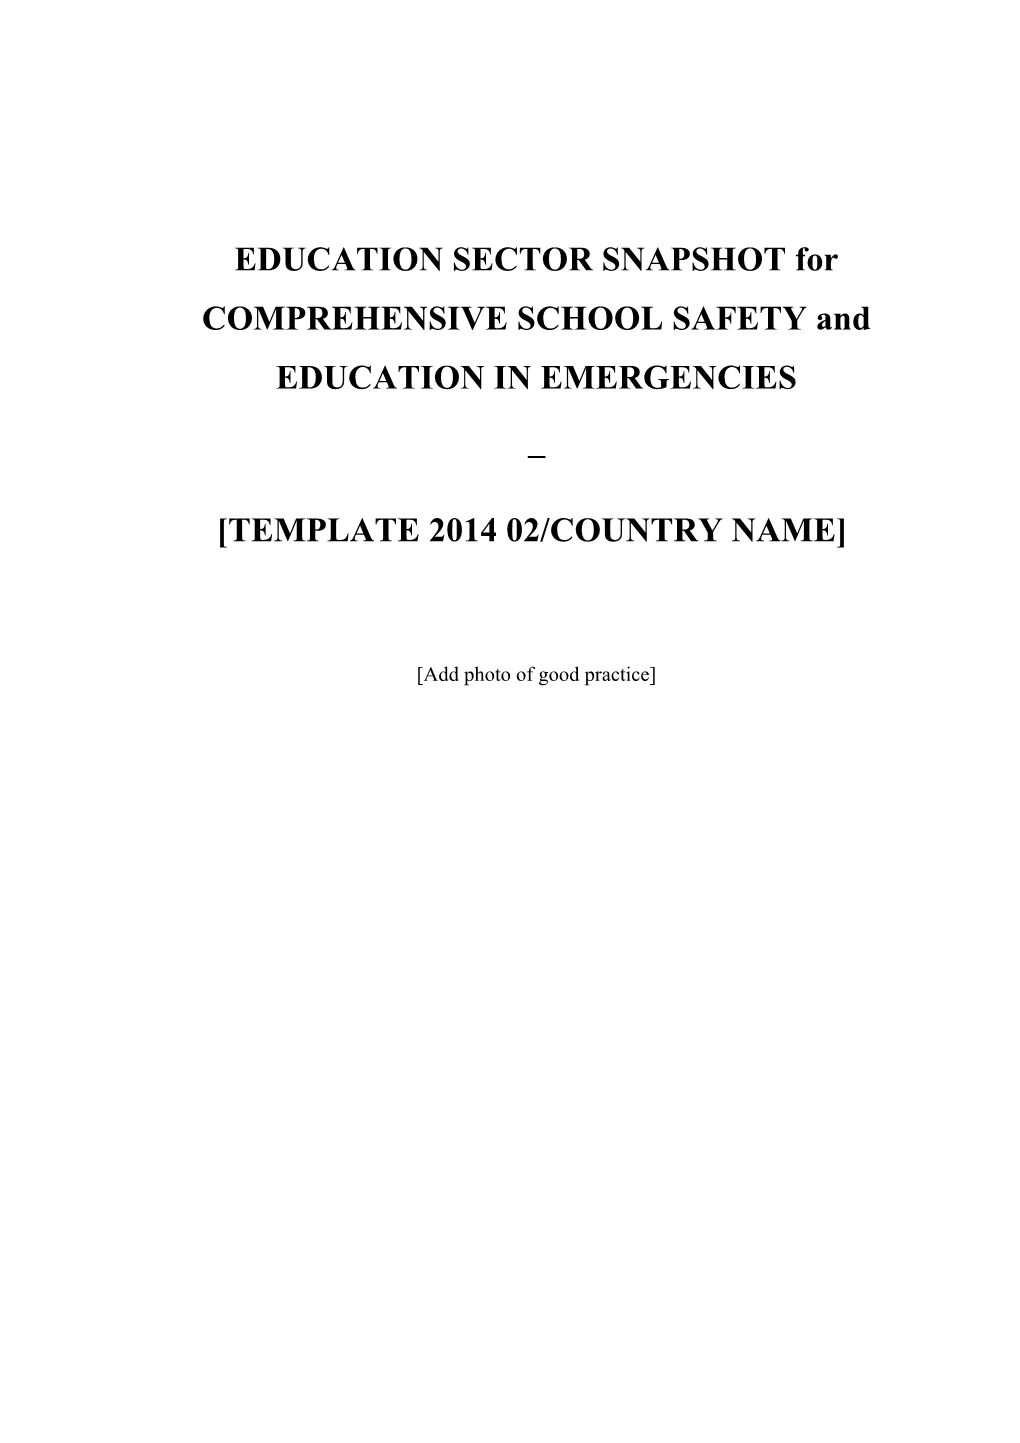 EDUCATION SECTOR SNAPSHOT for COMPREHENSIVE SCHOOL SAFETY and EDUCATION in EMERGENCIES